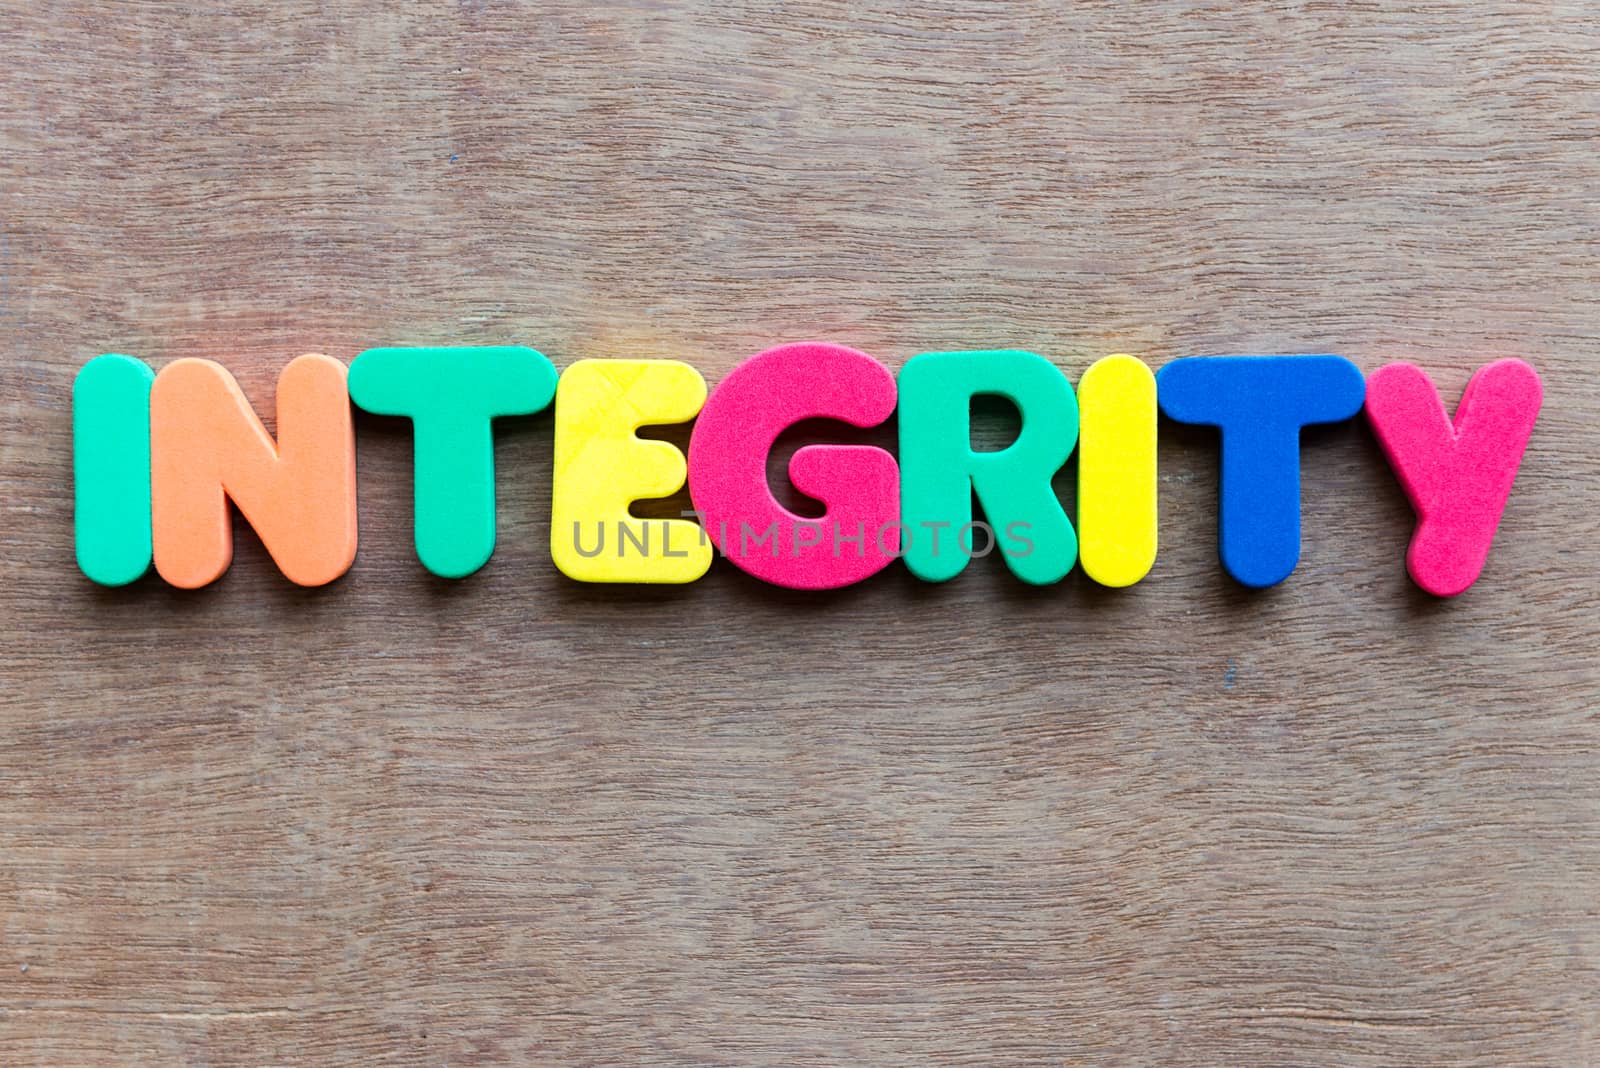 integrity word on wooden background